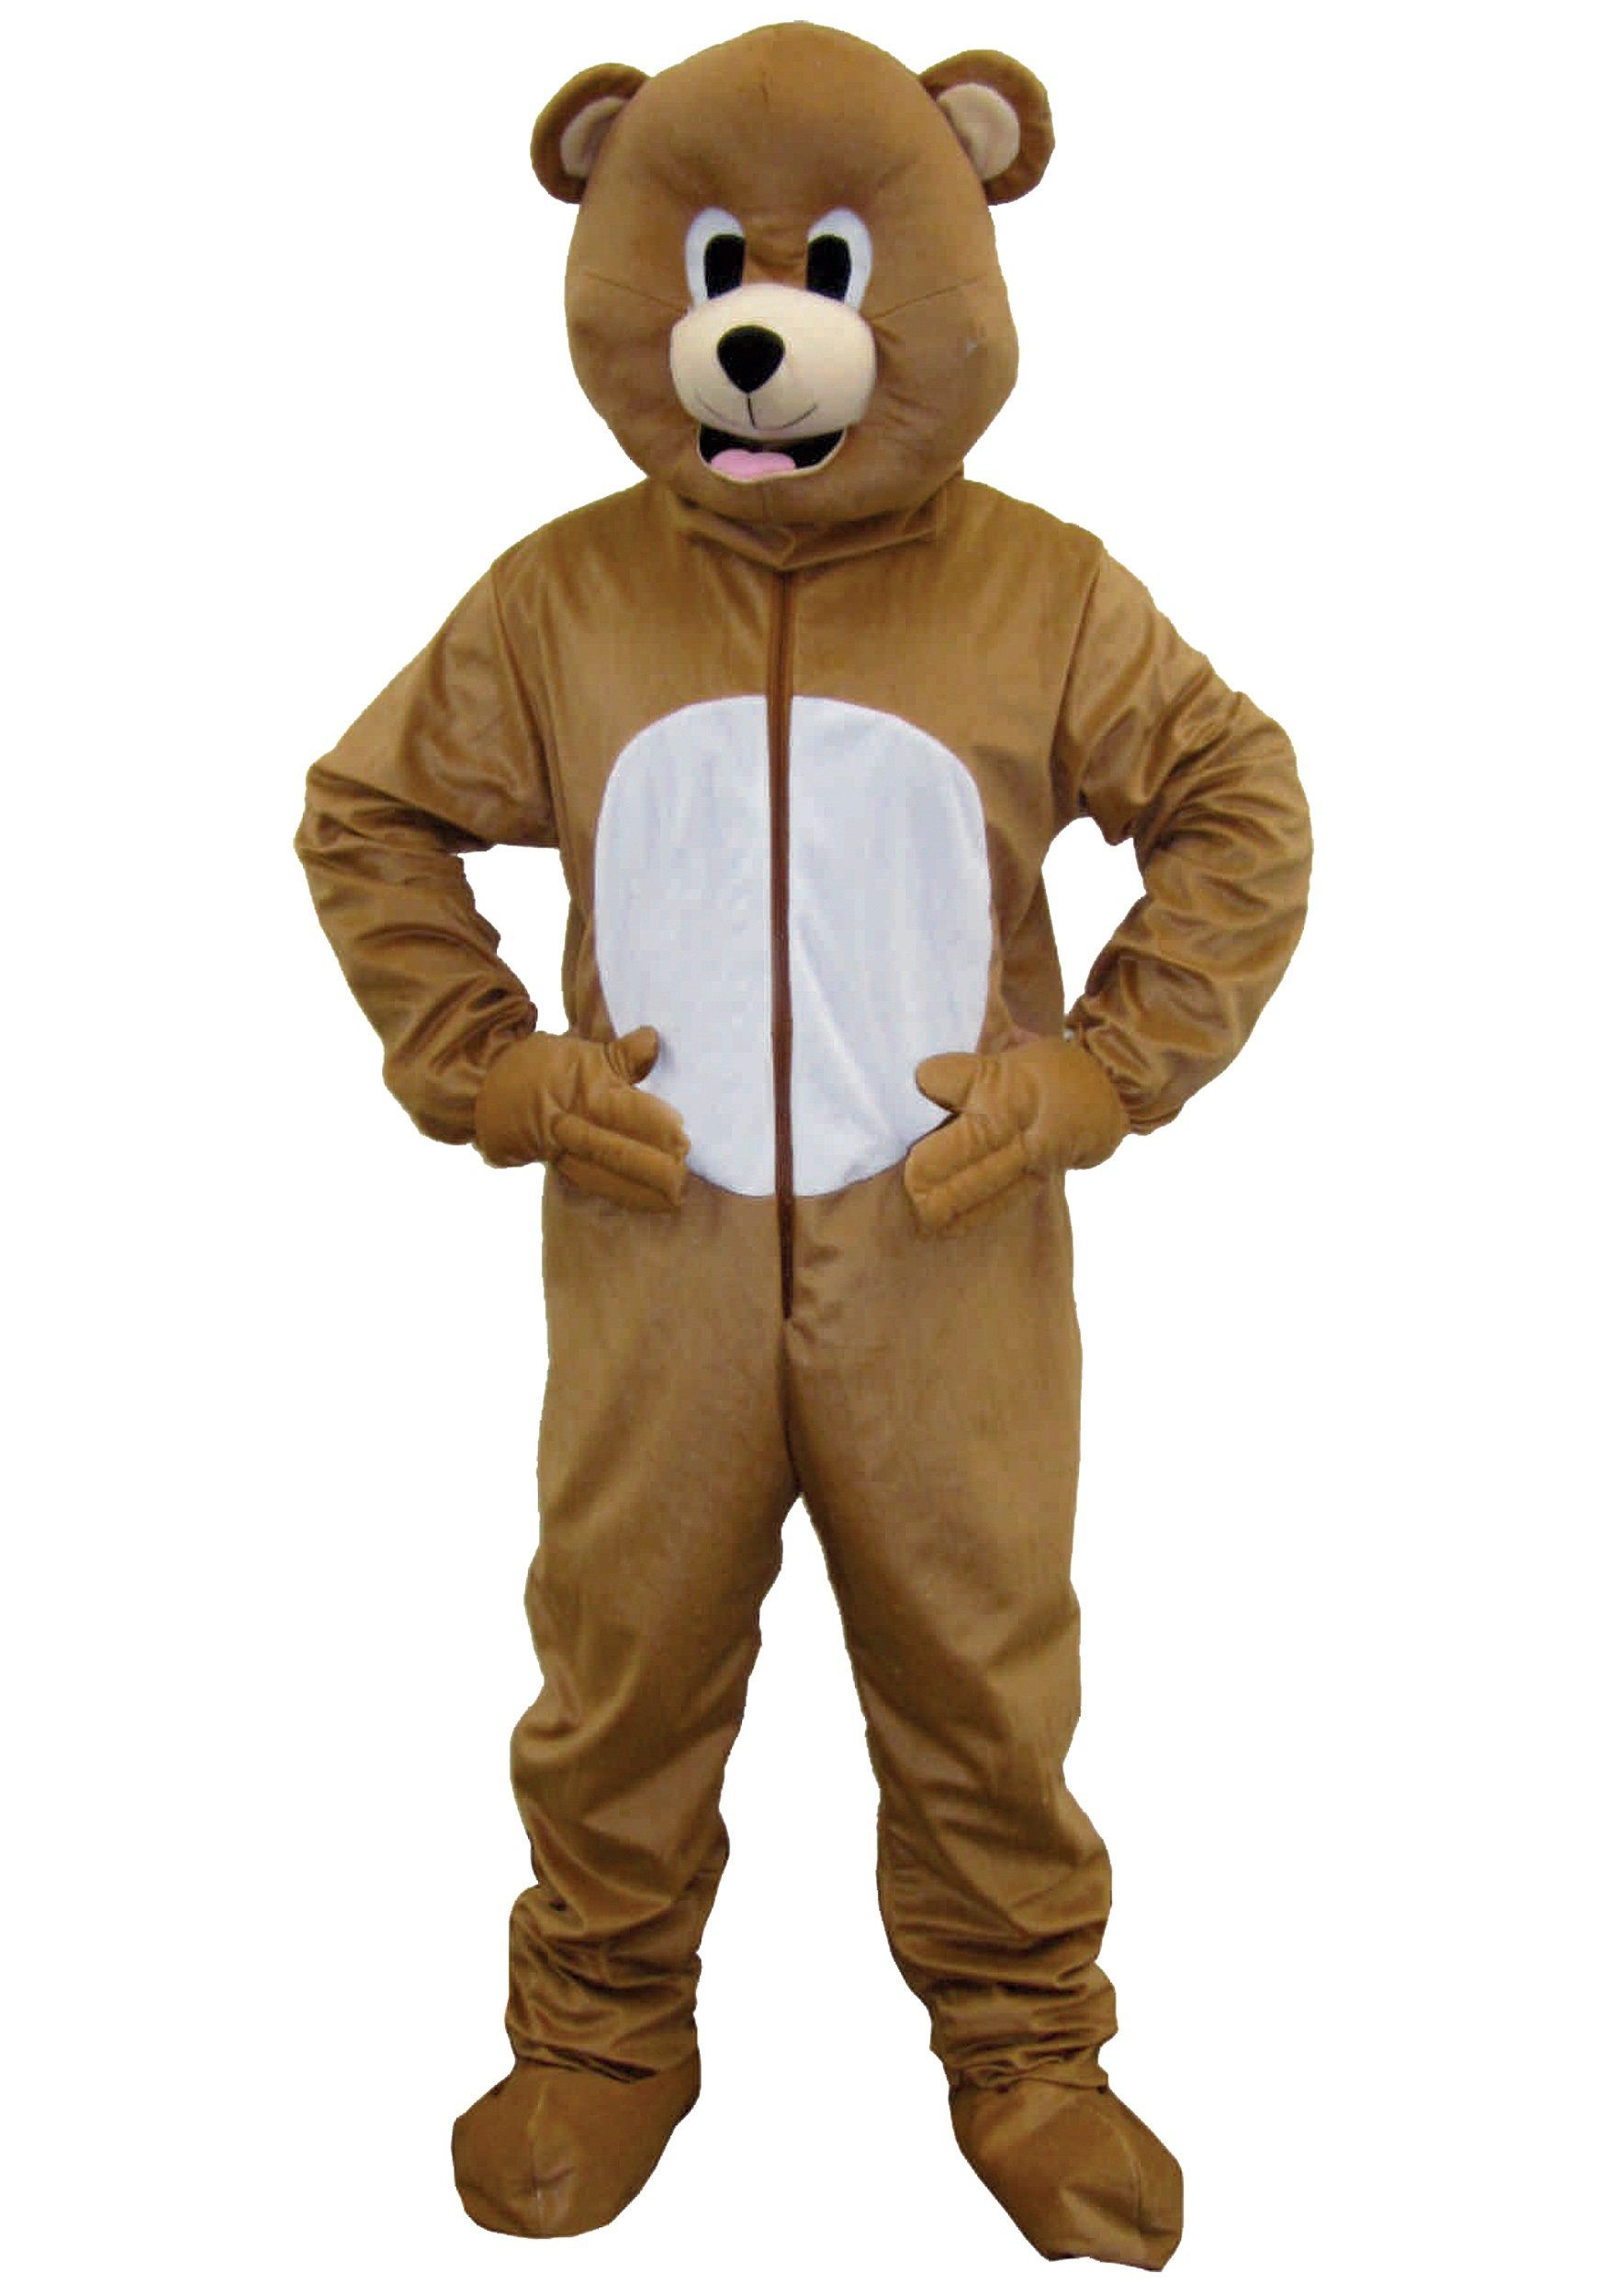 Teddy bear costumes for adults